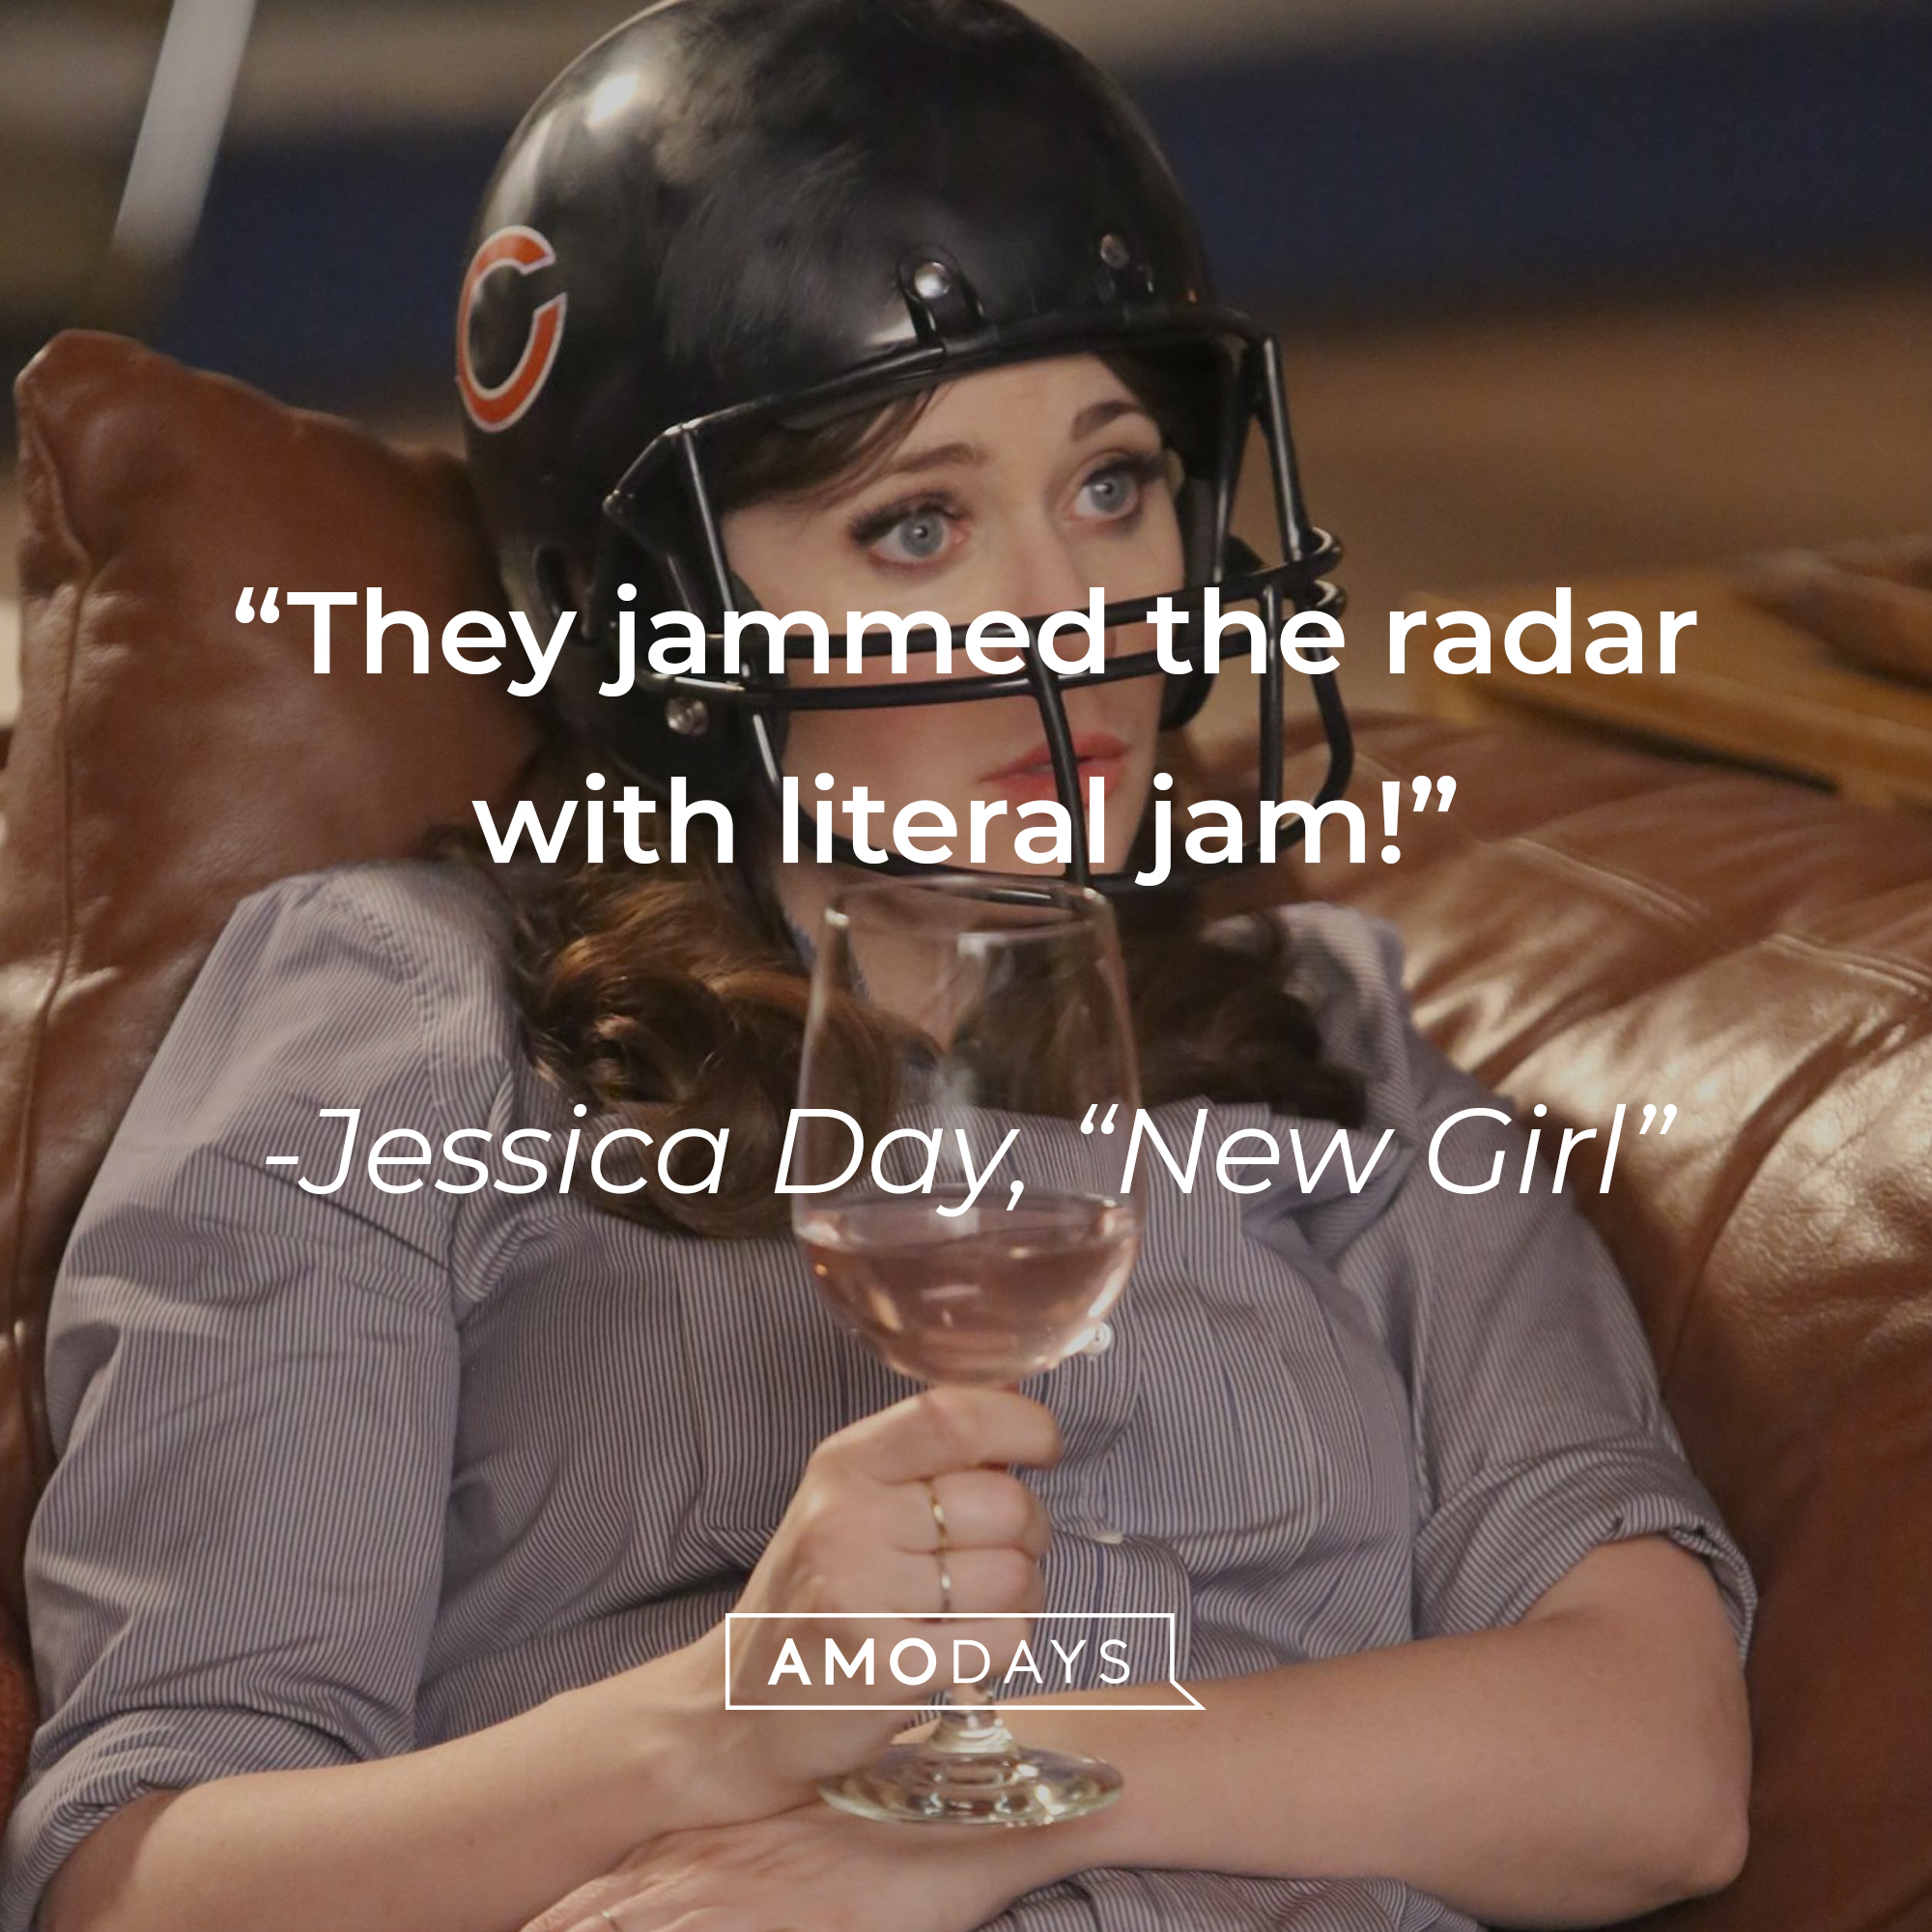 Jessica Day’s quote from “New Girl”: “They jammed the radar with literal jam!” | Source: facebook.com/OfficialNewGirl